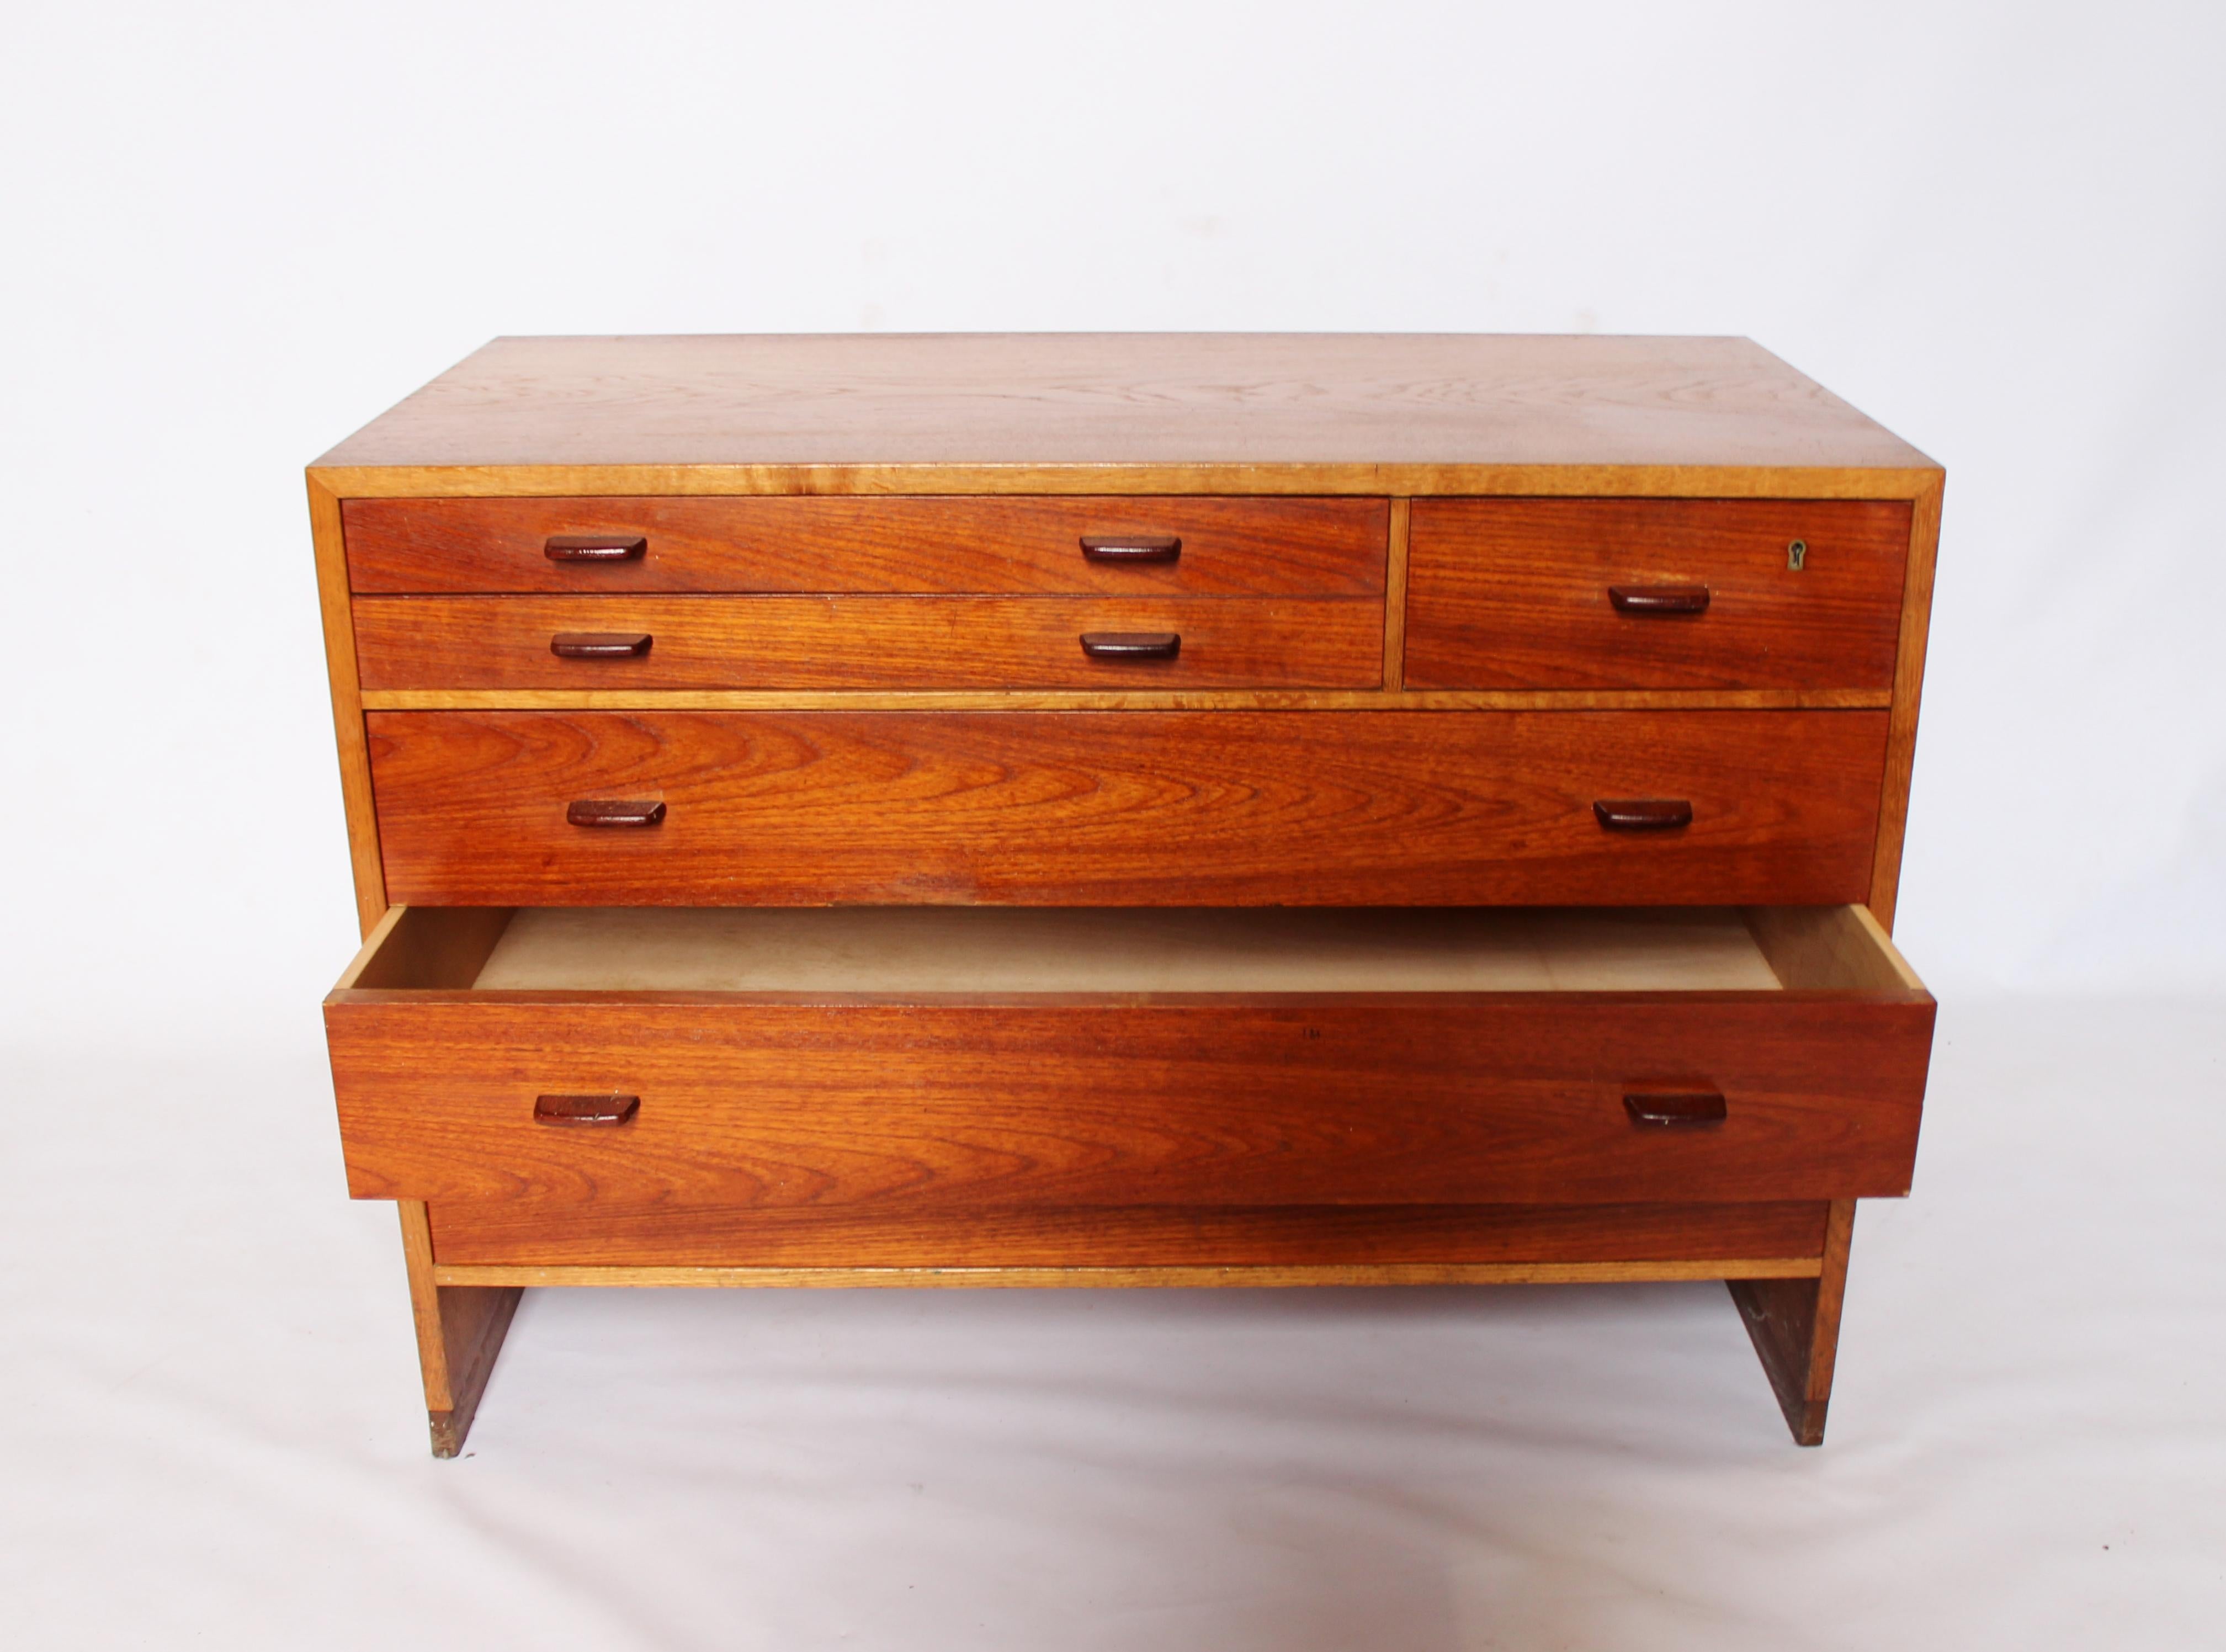 Chest of drawers, RY-16, in oak and teak designed by Hans J. Wegner and manufactured by RY furniture factory on the 20th of September 1955. The chest is in great vintage condition.